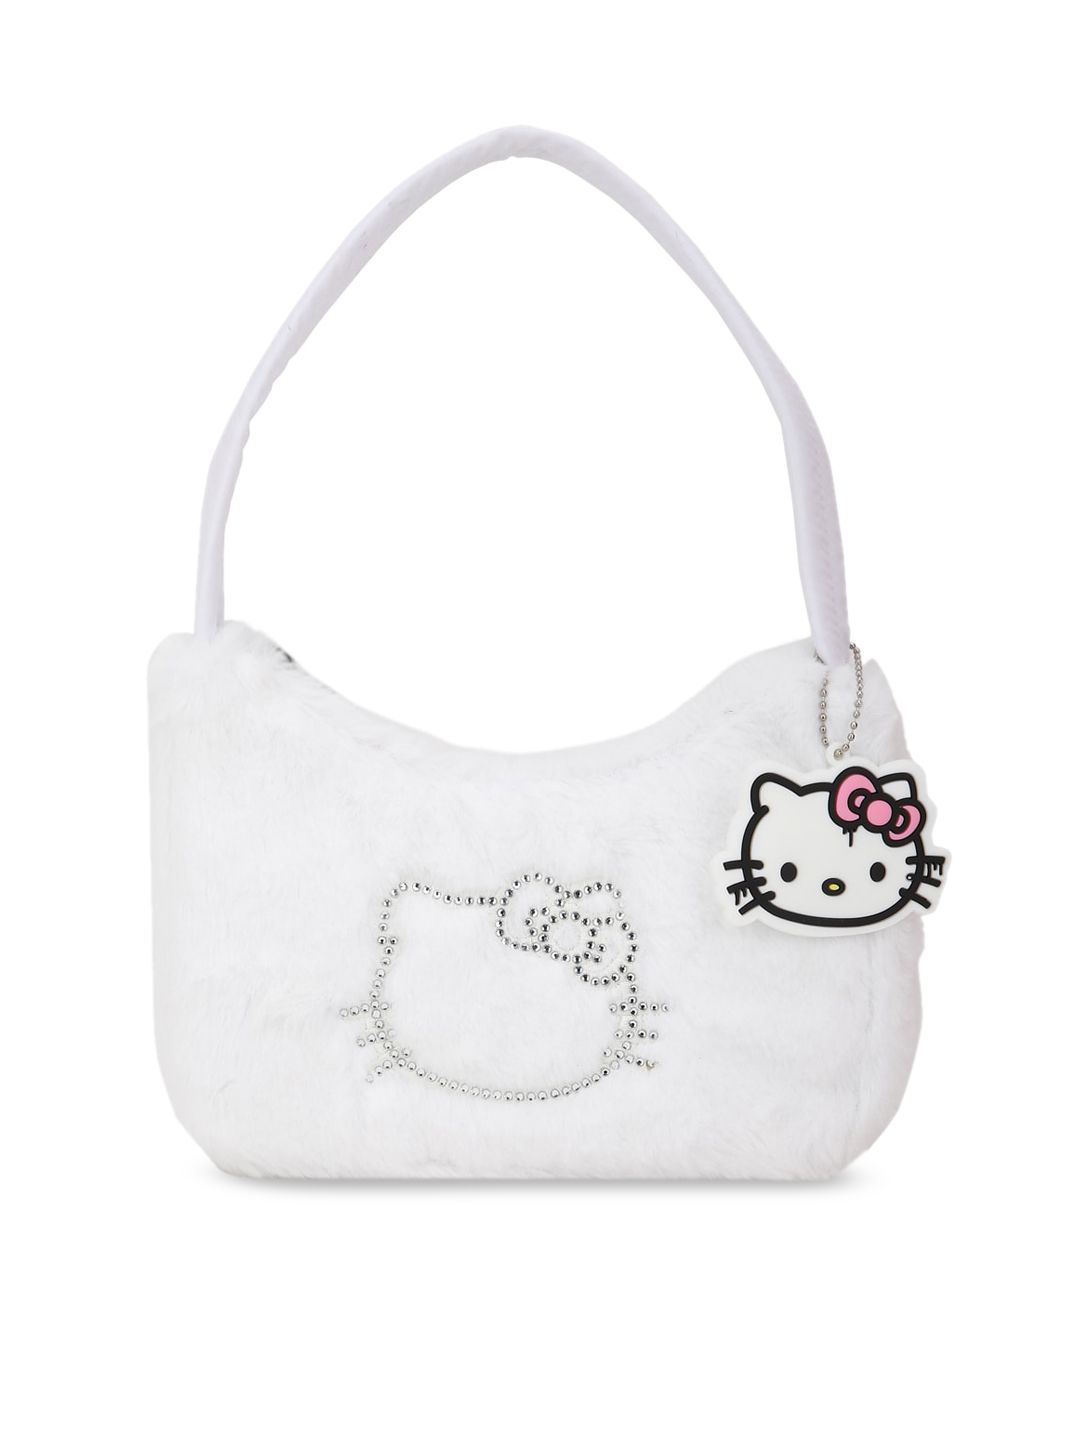 FOREVER 21 White PU Structured Shoulder Bag with Applique Price in India